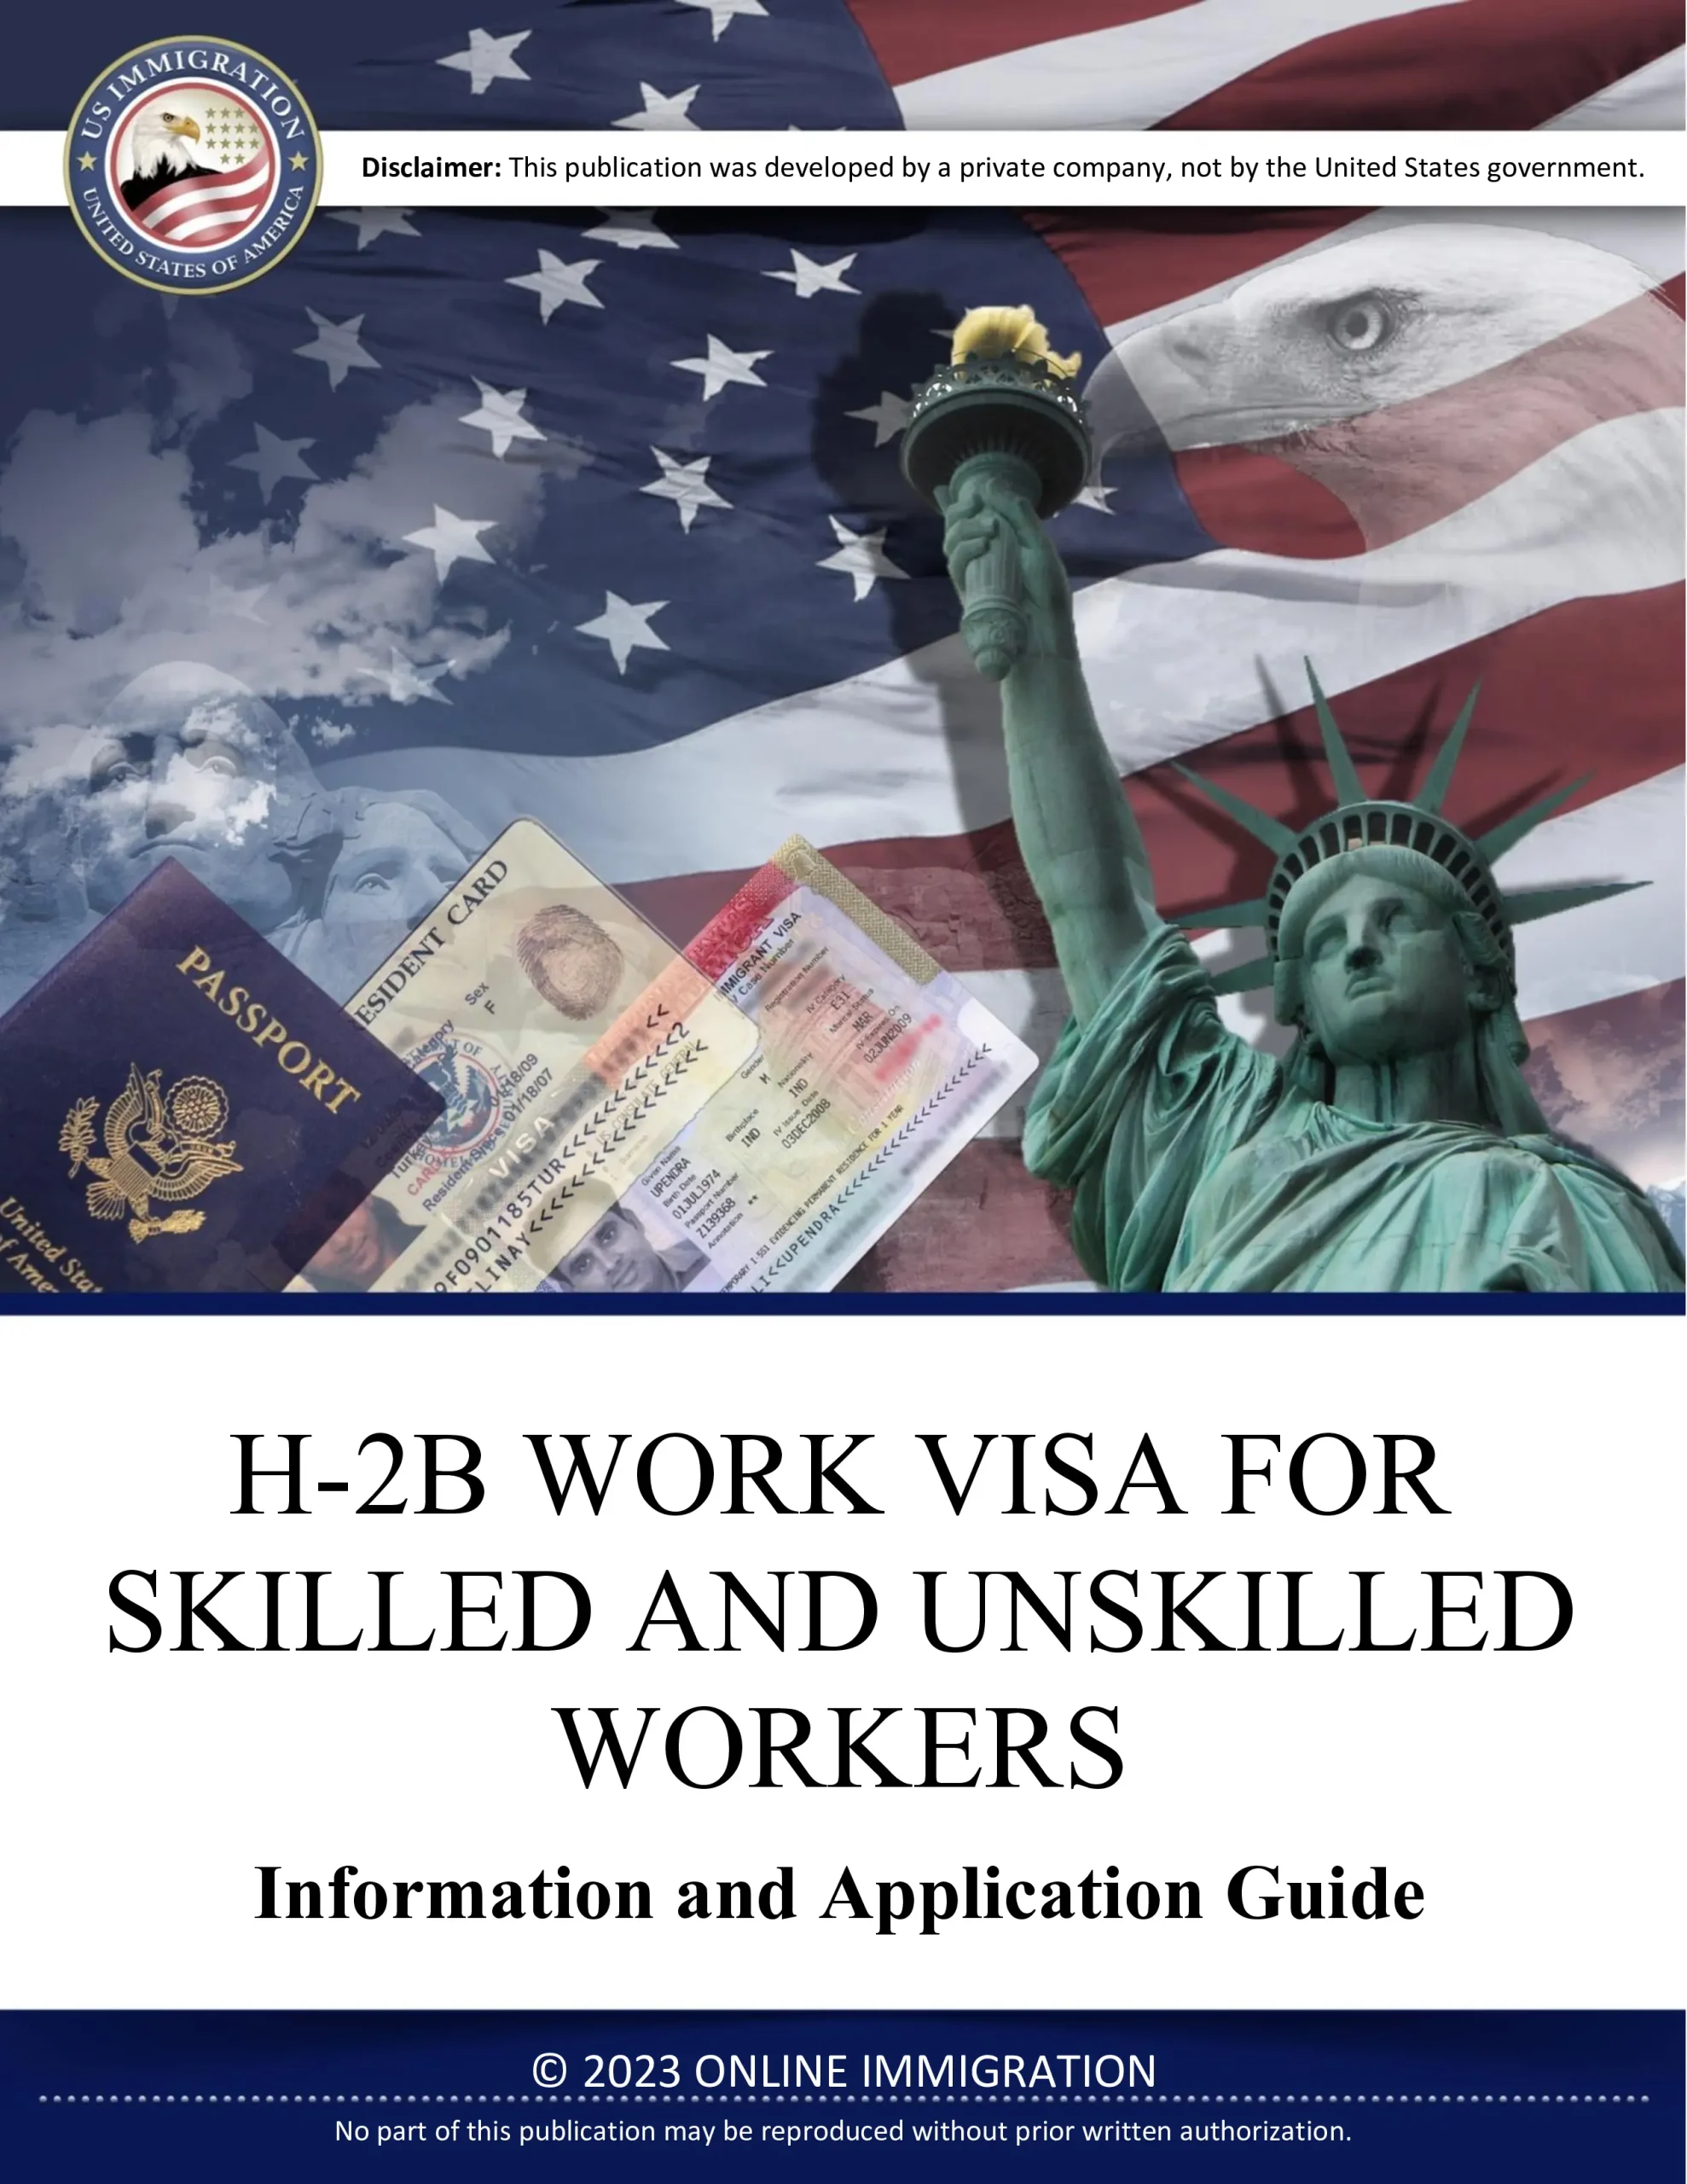 H-2B Work Visa for Skilled and Unskilled Workers